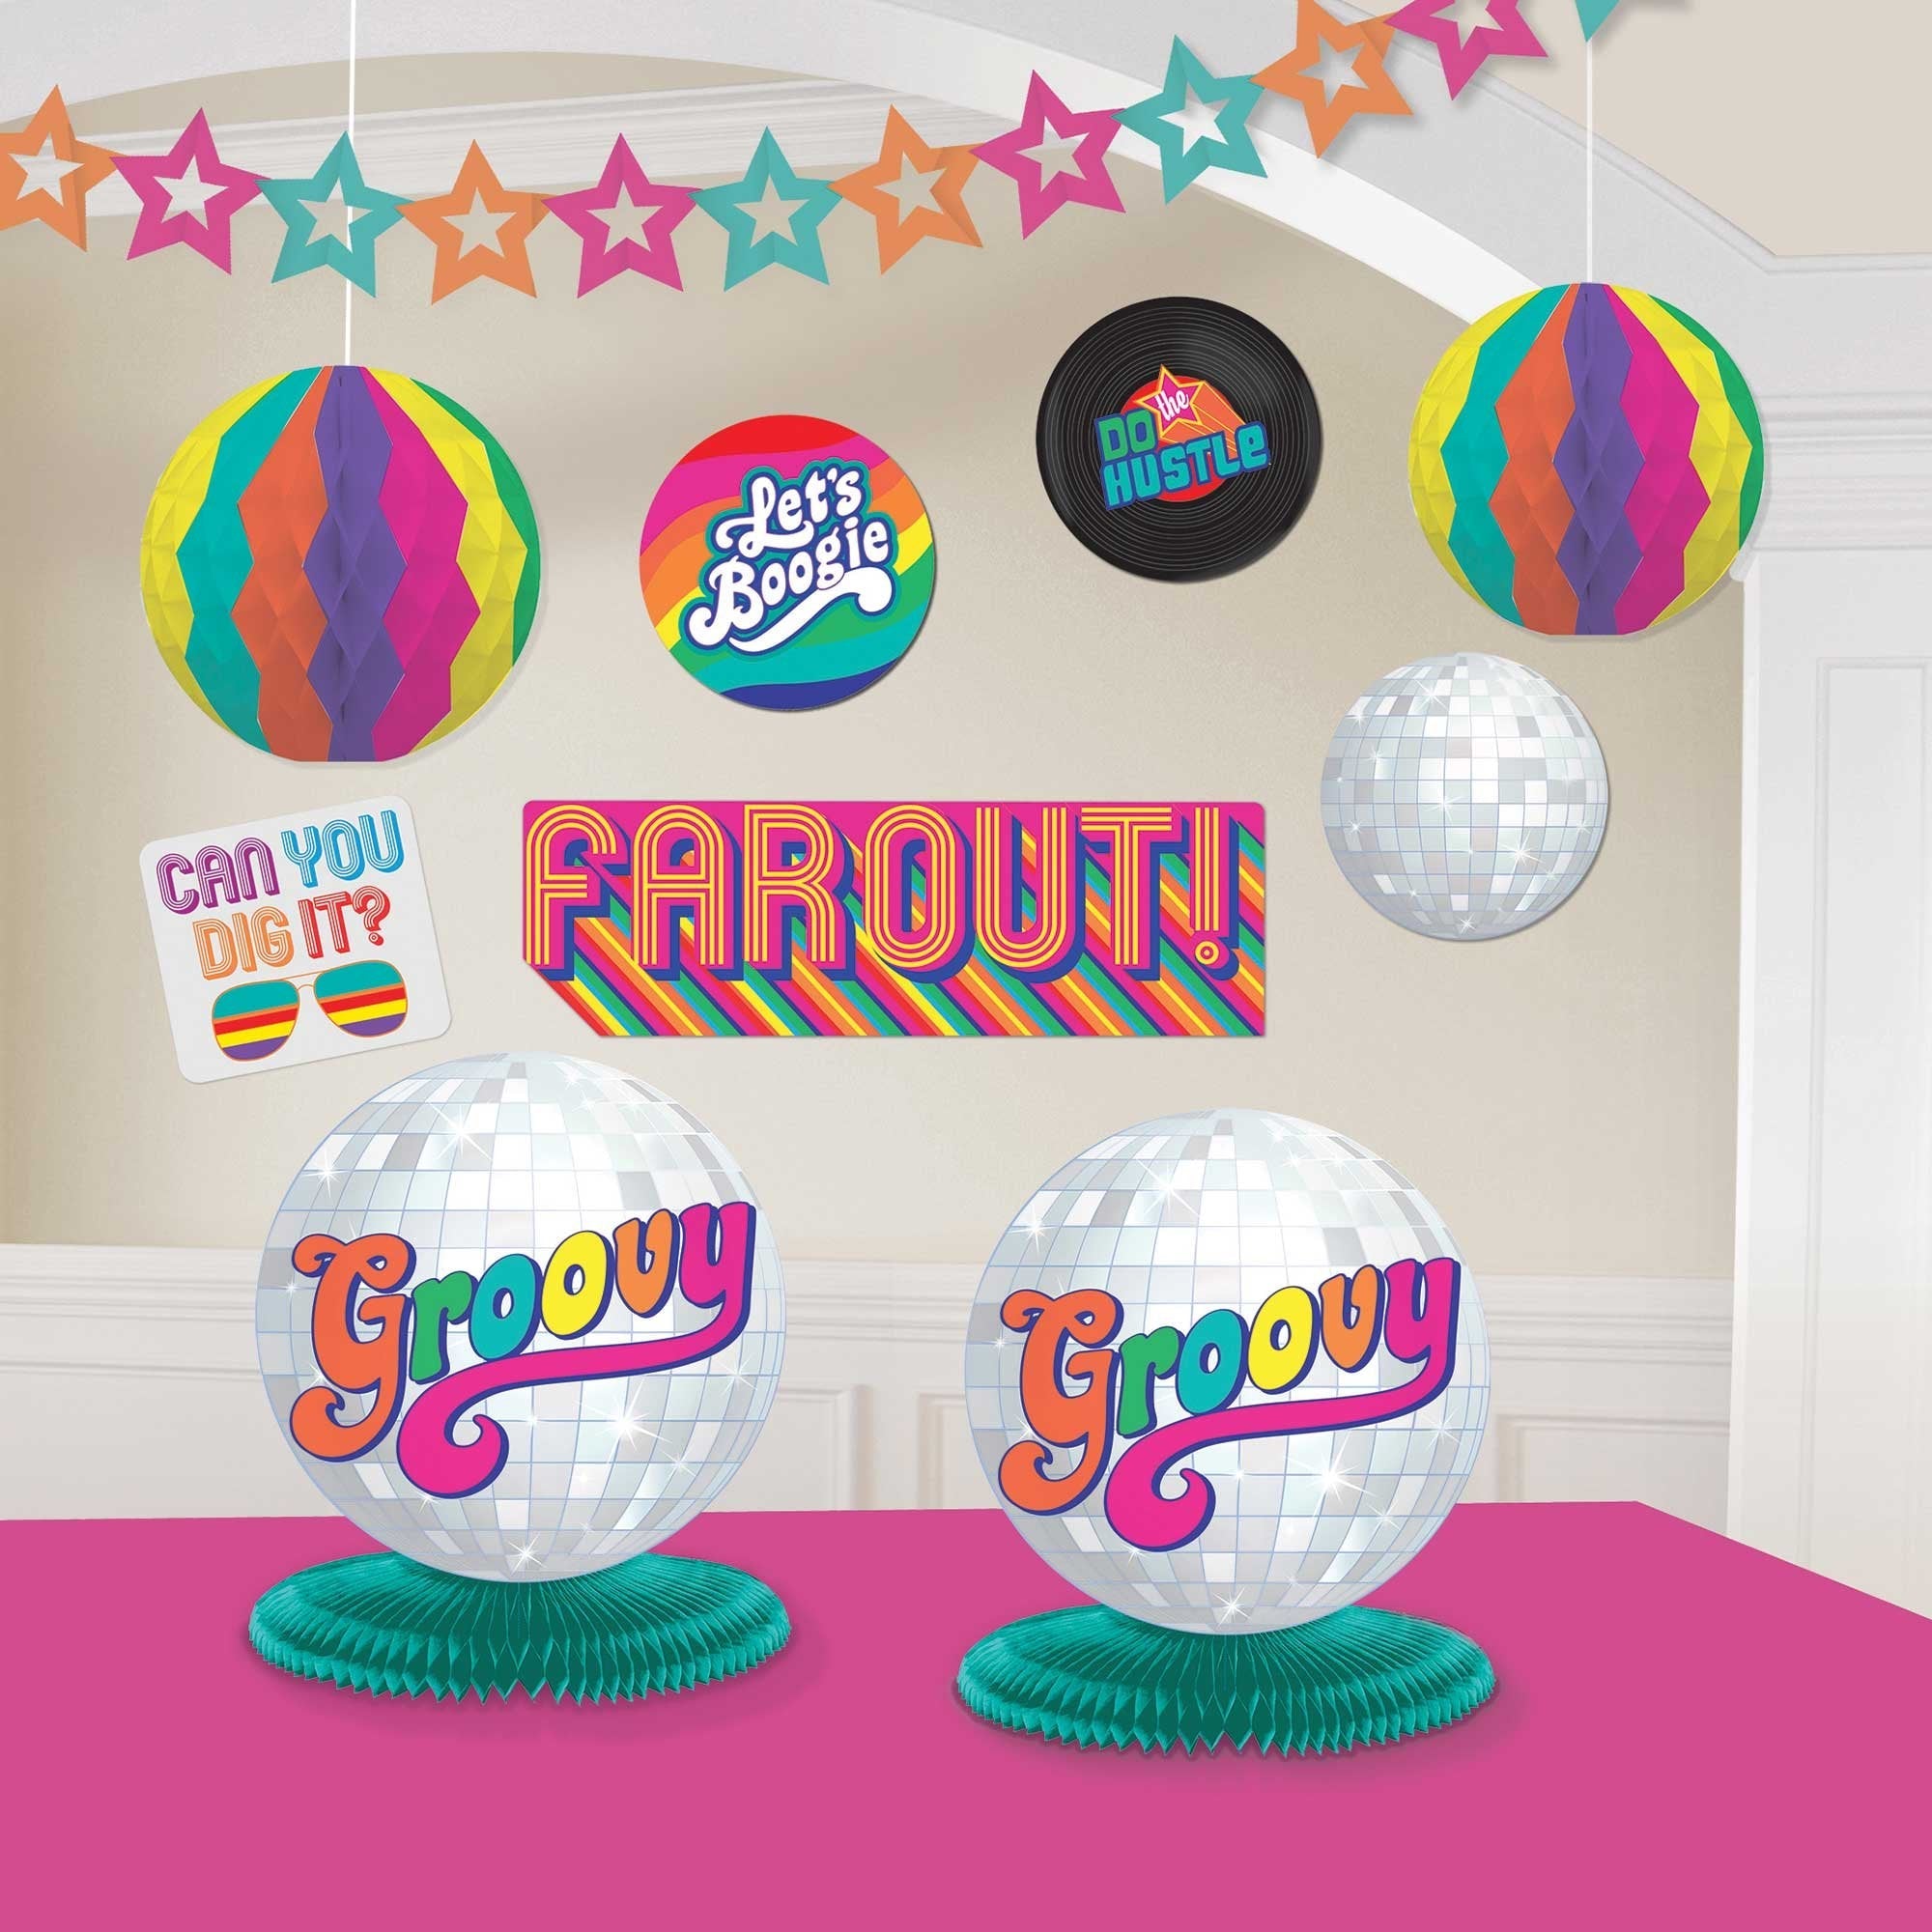 Get ready to boogie down and disco fever with our far-out '70s party decor! Turn back the clock and groove to the funky beats with our retro decorations, featuring psychedelic patterns, disco balls, and retro backdrops.